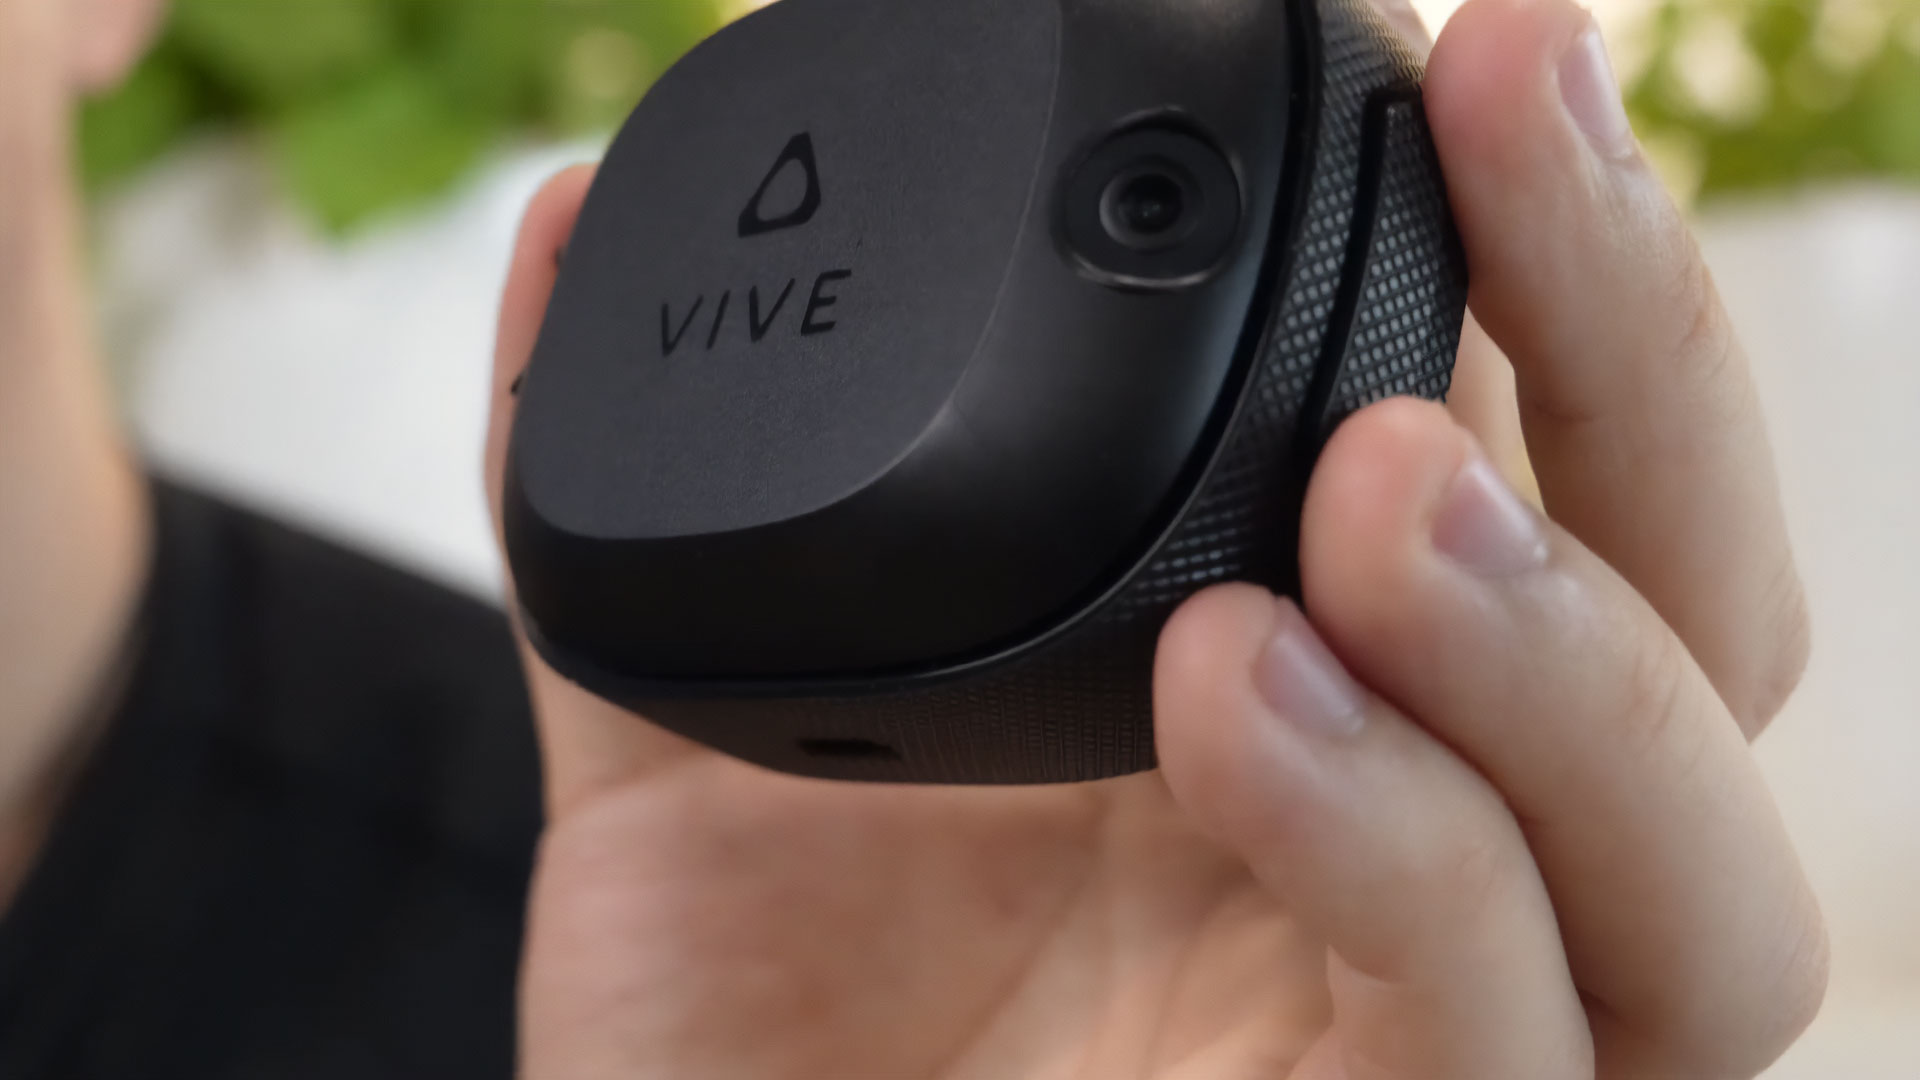 HTC Announces Inside-out Tracker for VR Accessories & Body Tracking